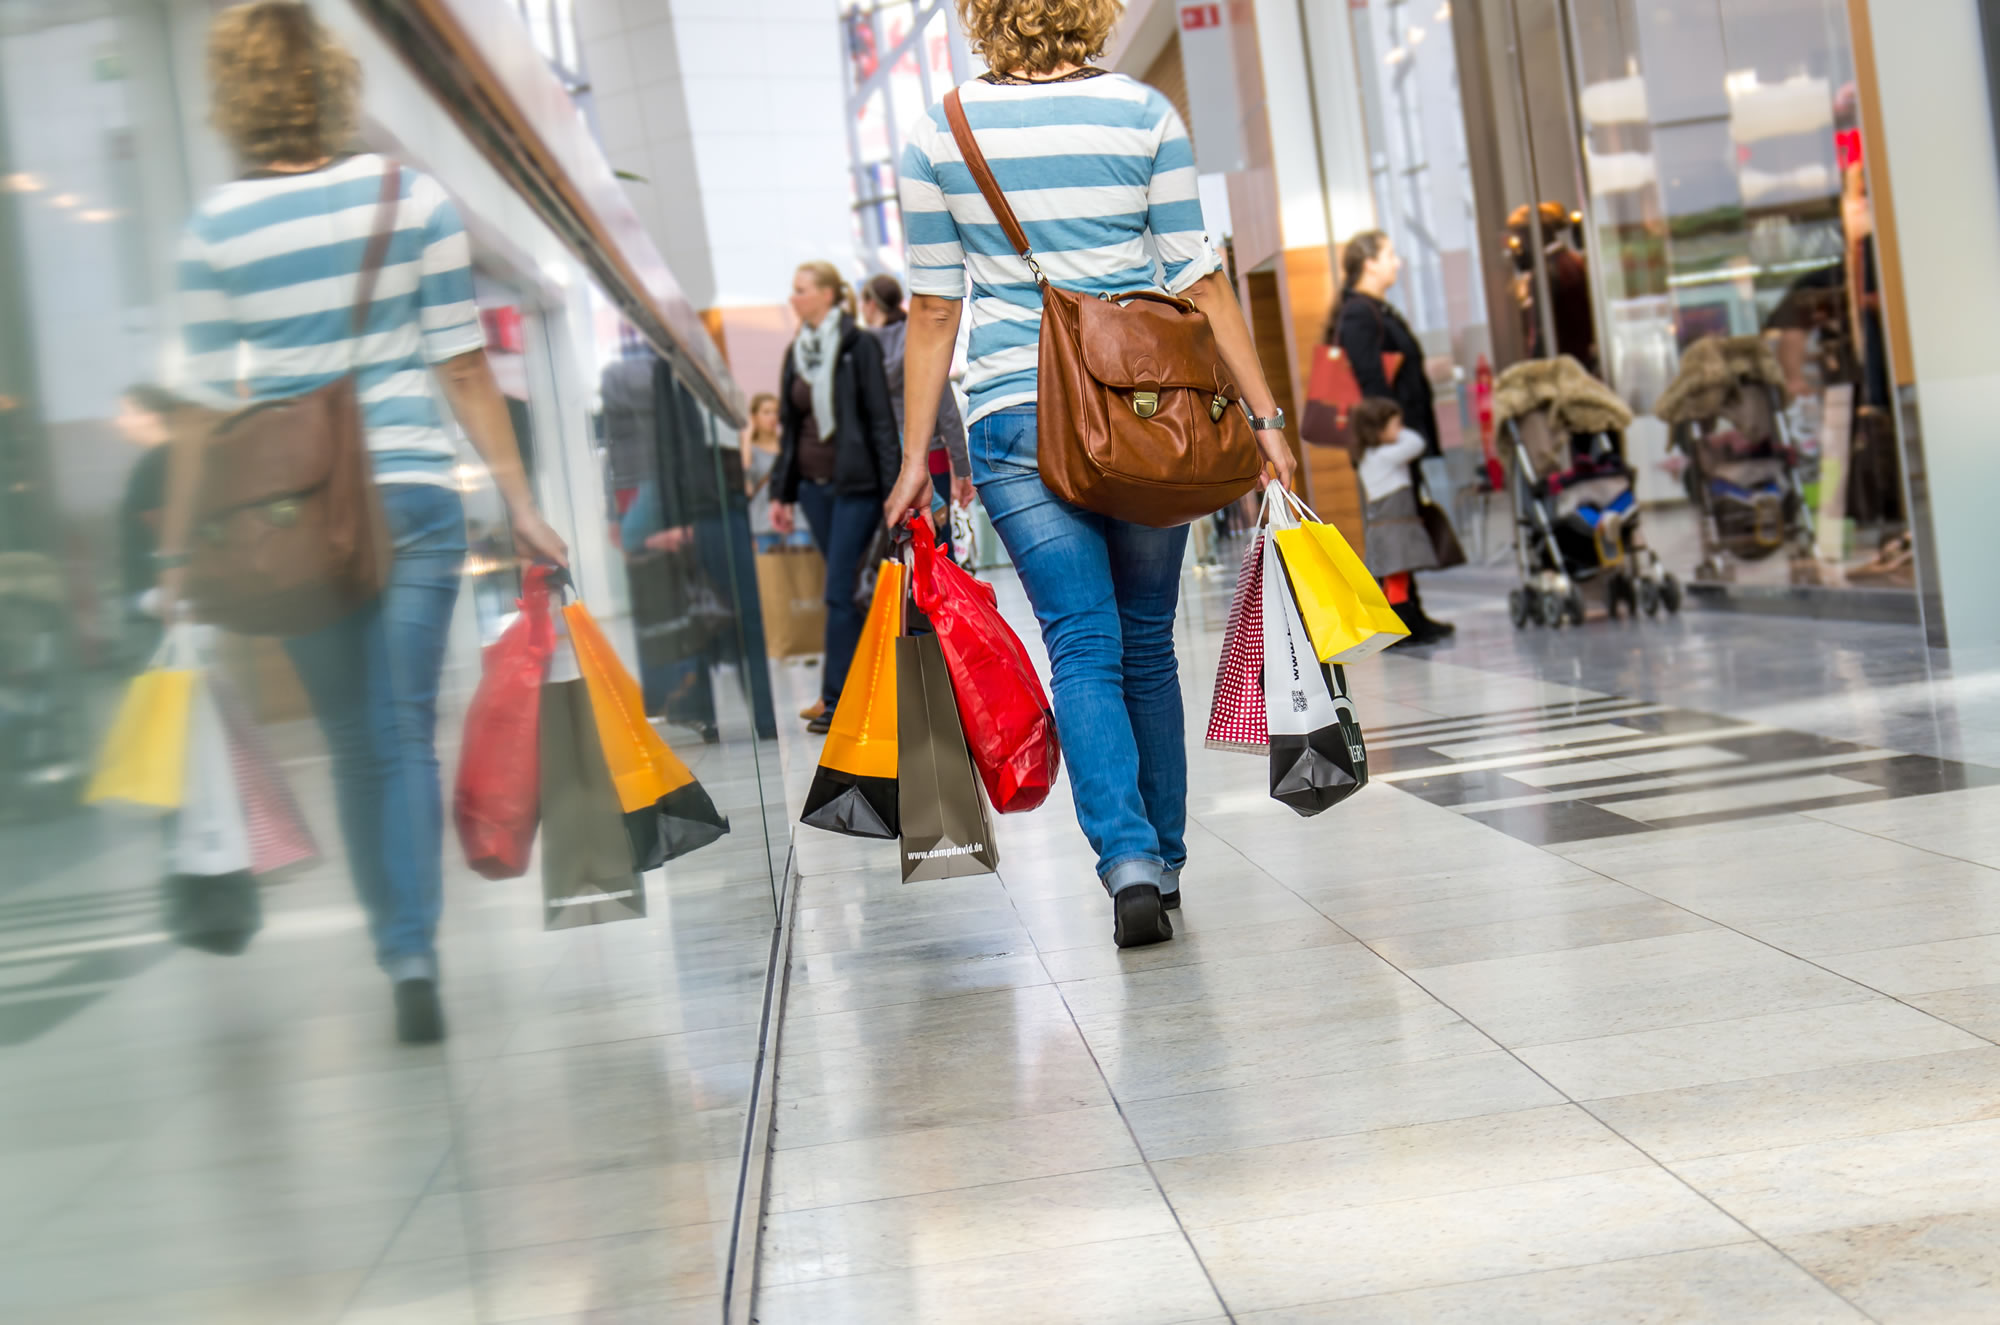 Shopping Accident, Slip compensation, Public liability claims, fall in supermarket claim, public place accidents